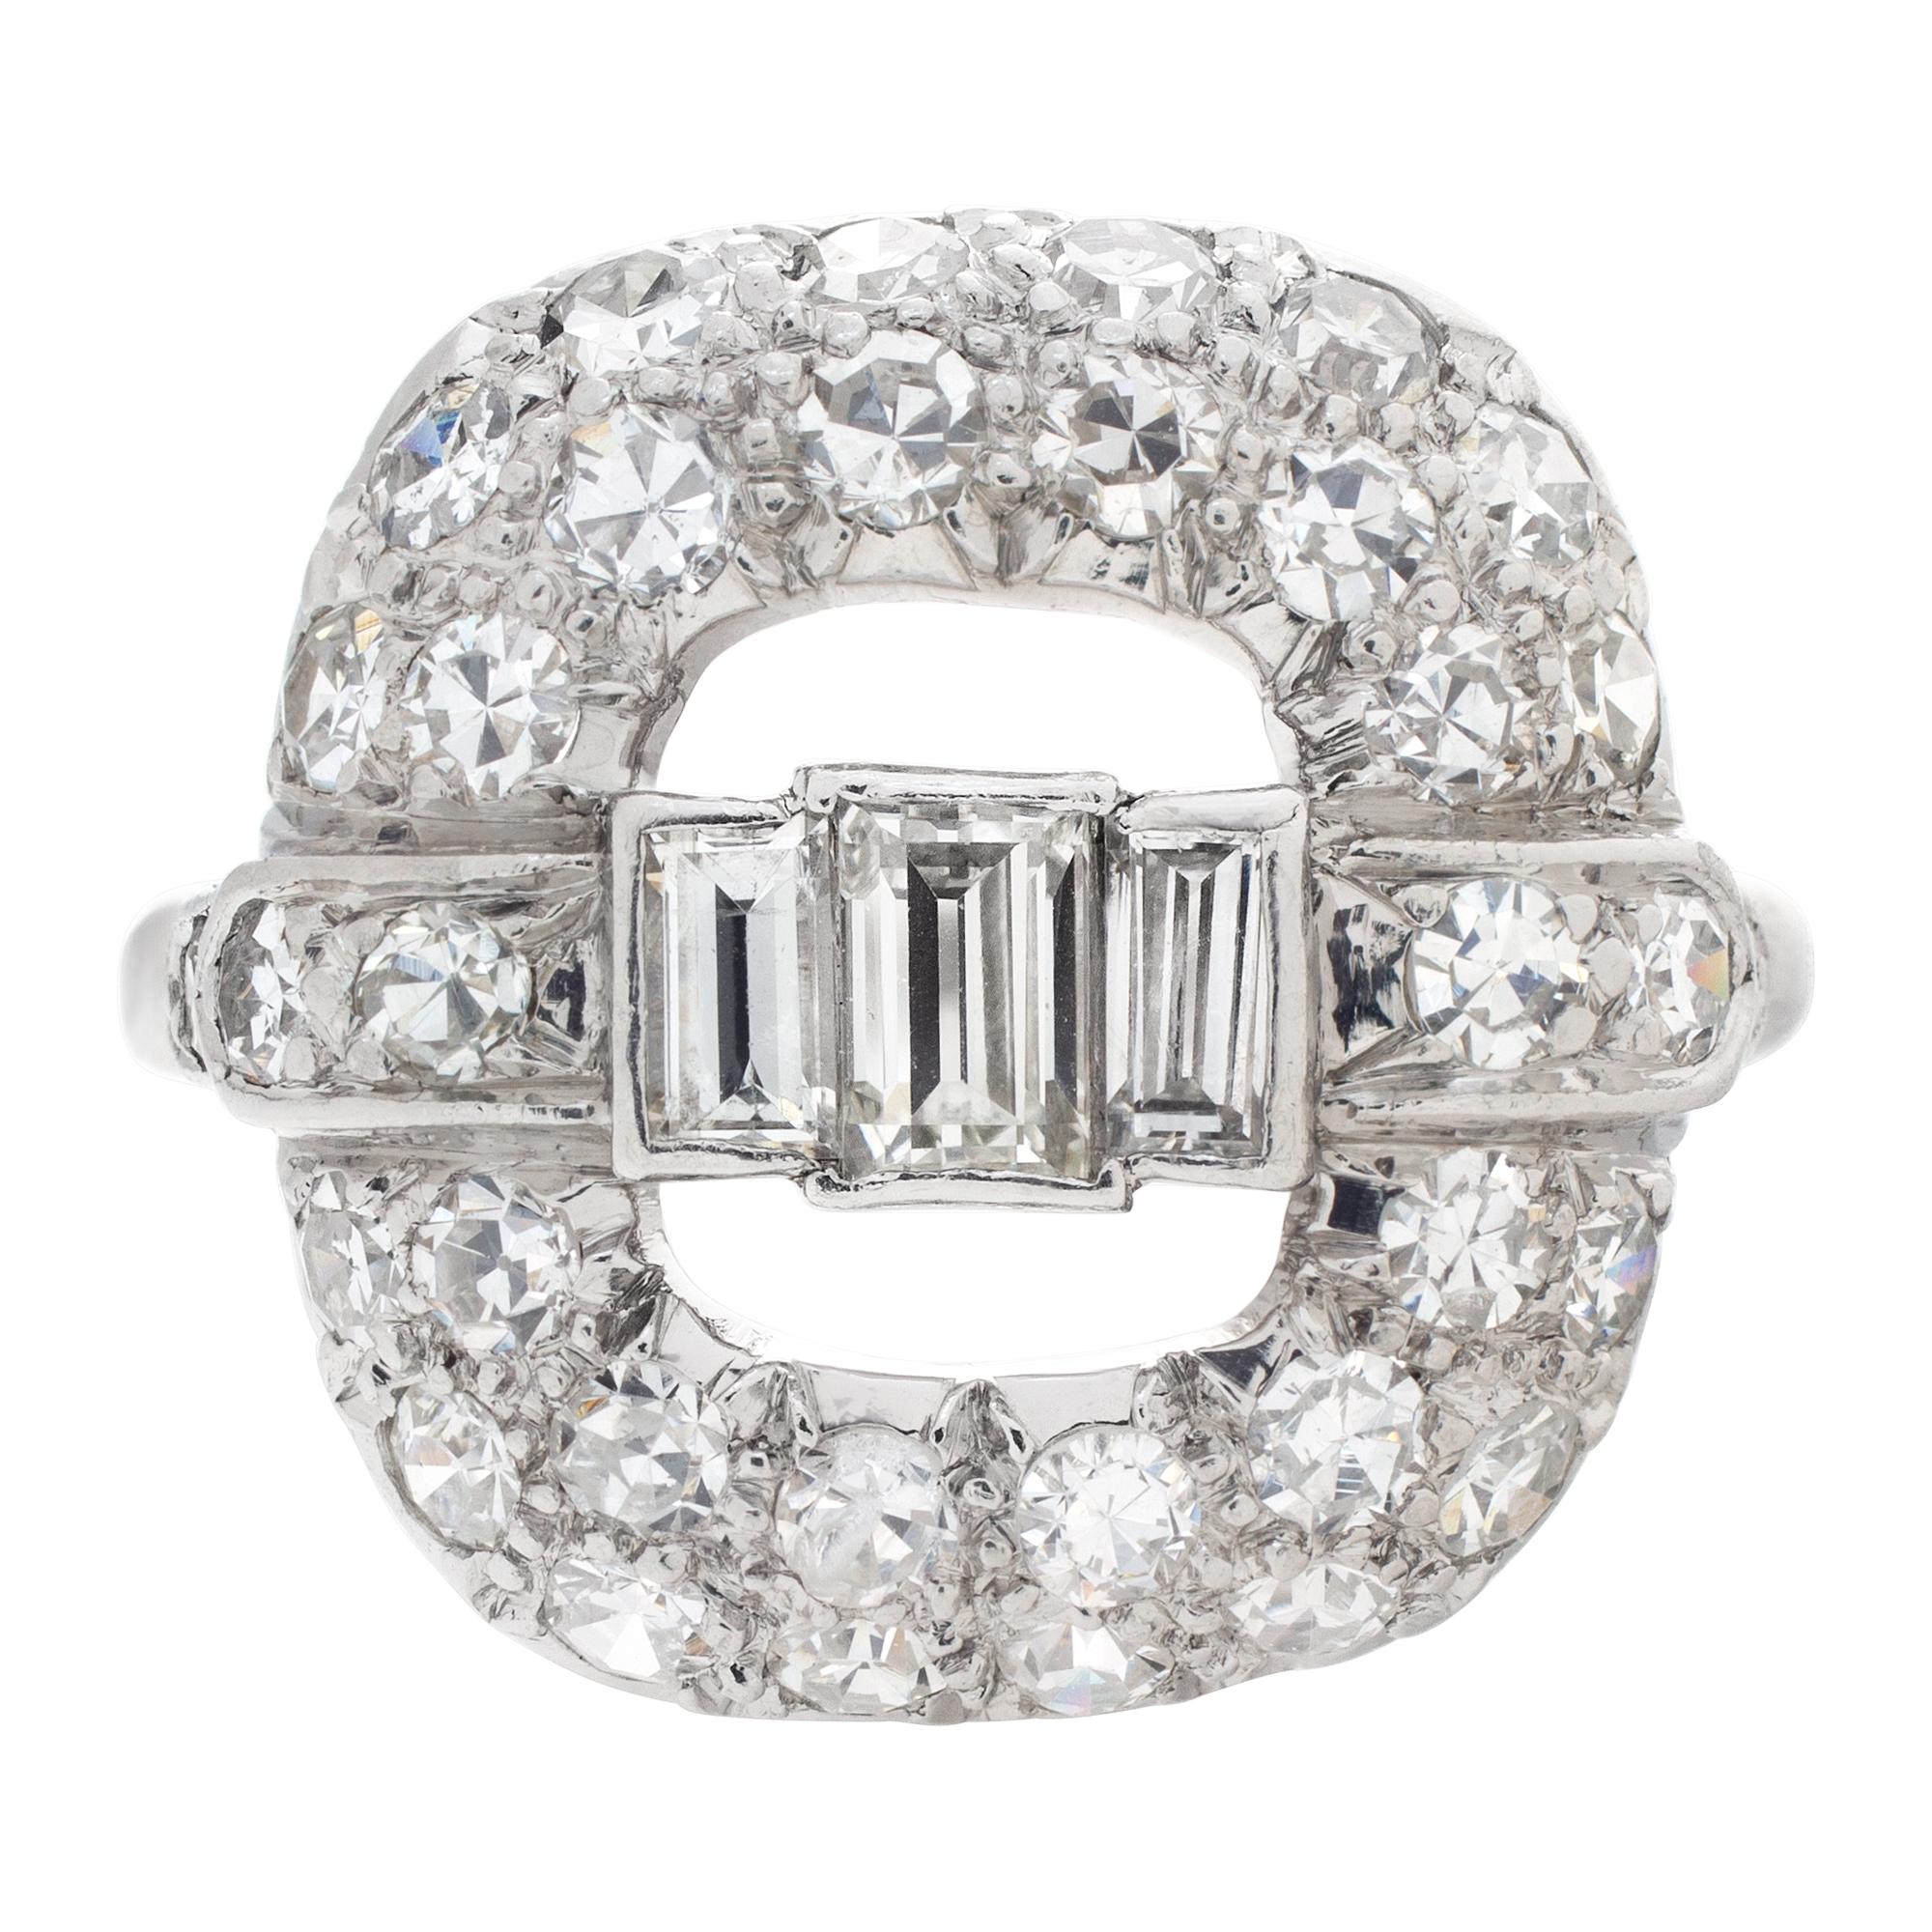 Vintage platinum diamond ring with approximately 0.88 carats in round & baguette diamonds. Size 6.<br /><br />This Diamond ring is currently size 6 and some items can be sized up or down, please ask! It weighs 2.7 pennyweights and is Platinum.
